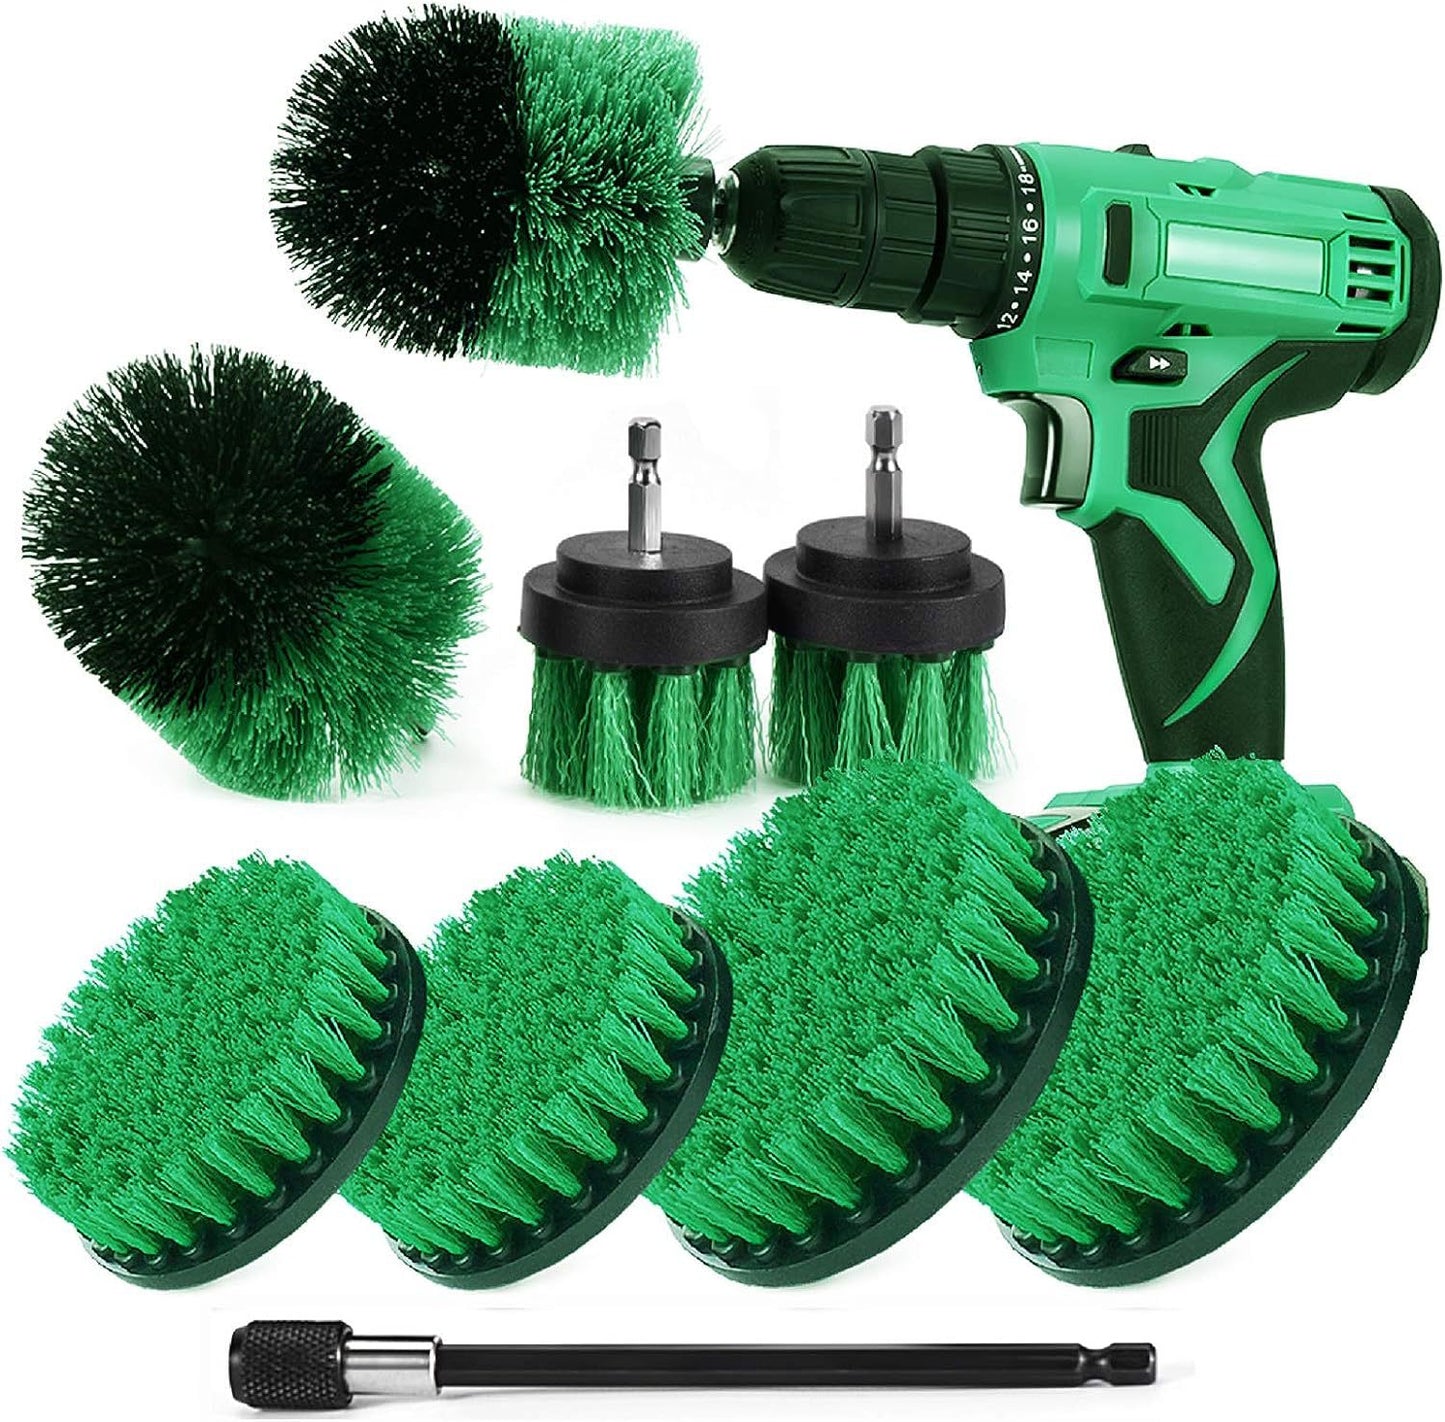 Electric Cleaning Brush Electric Drill Brush Set